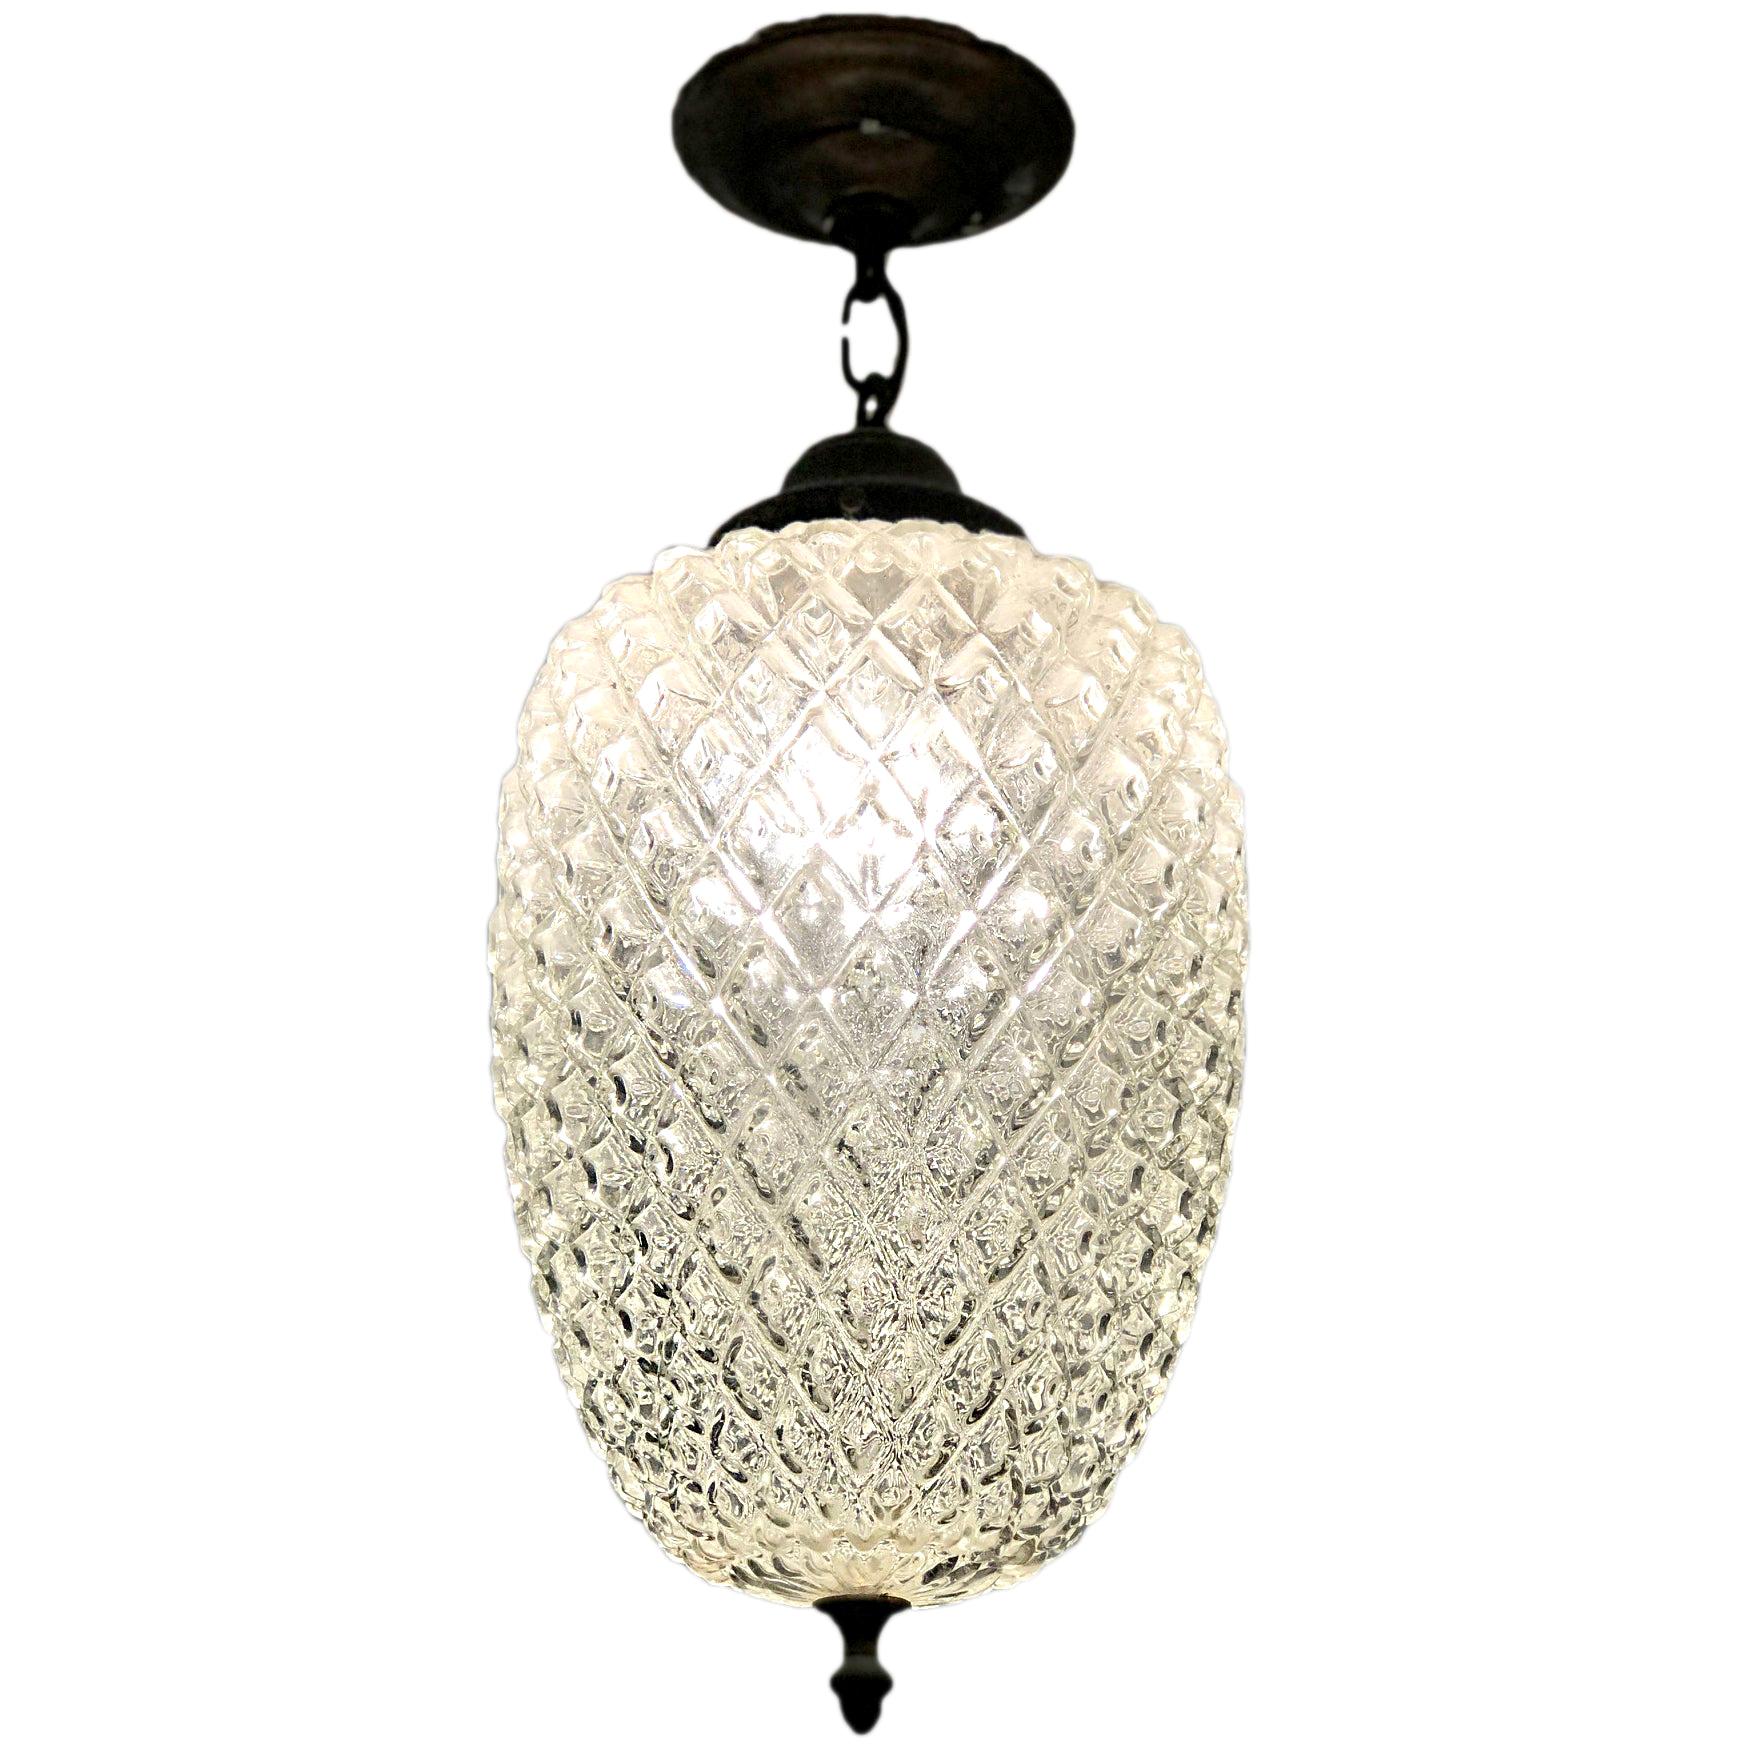 Set of 4 French Molded Glass Light Fixtures